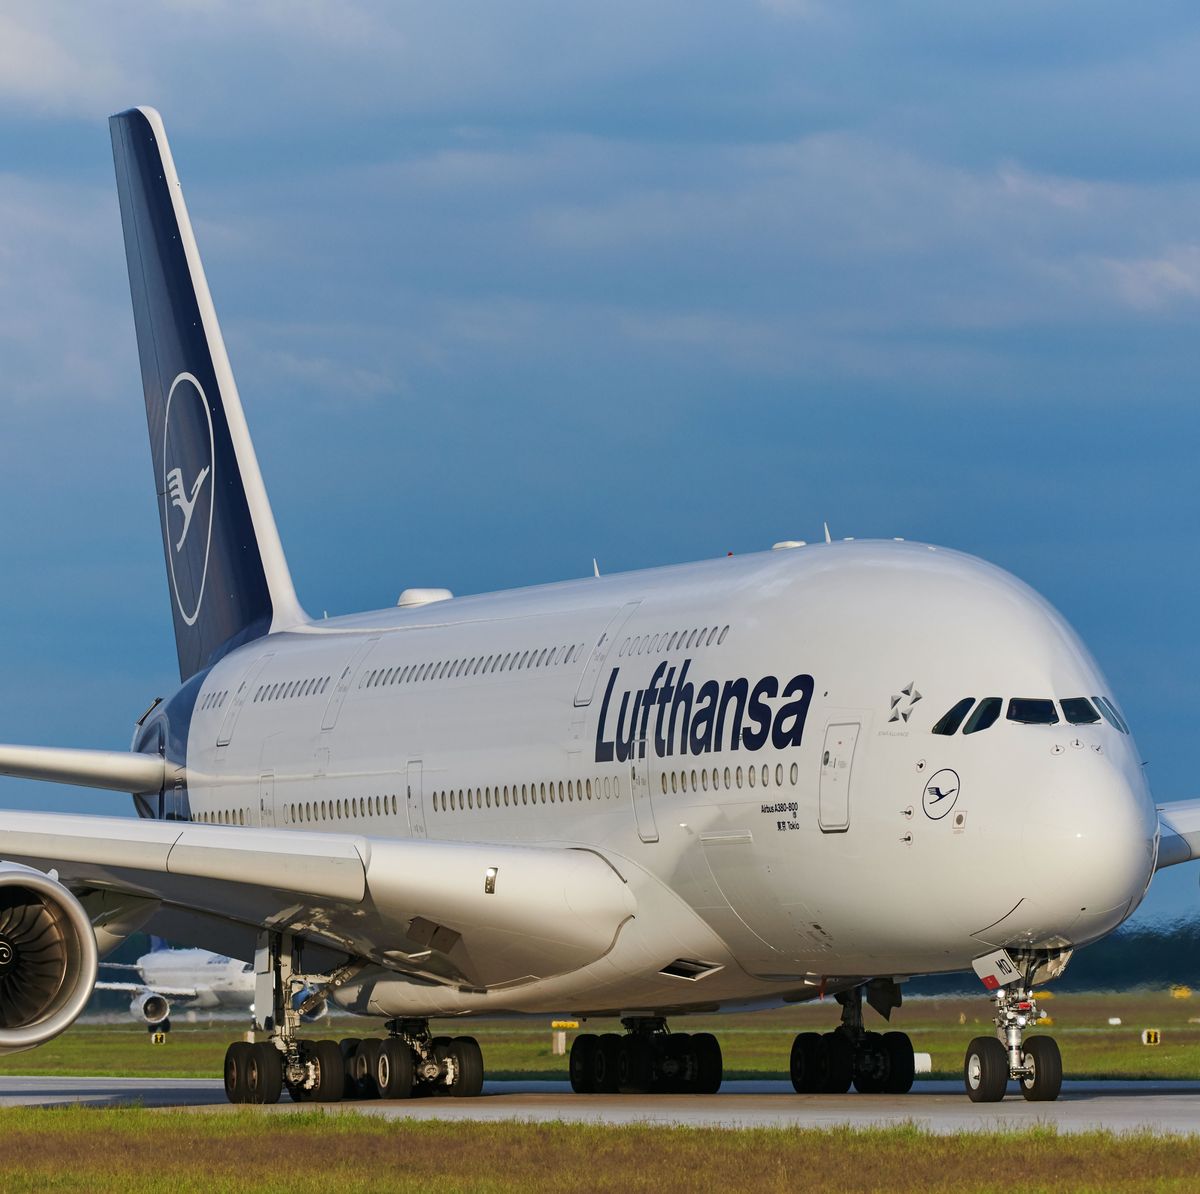 Is the A380 the biggest plane in the world?